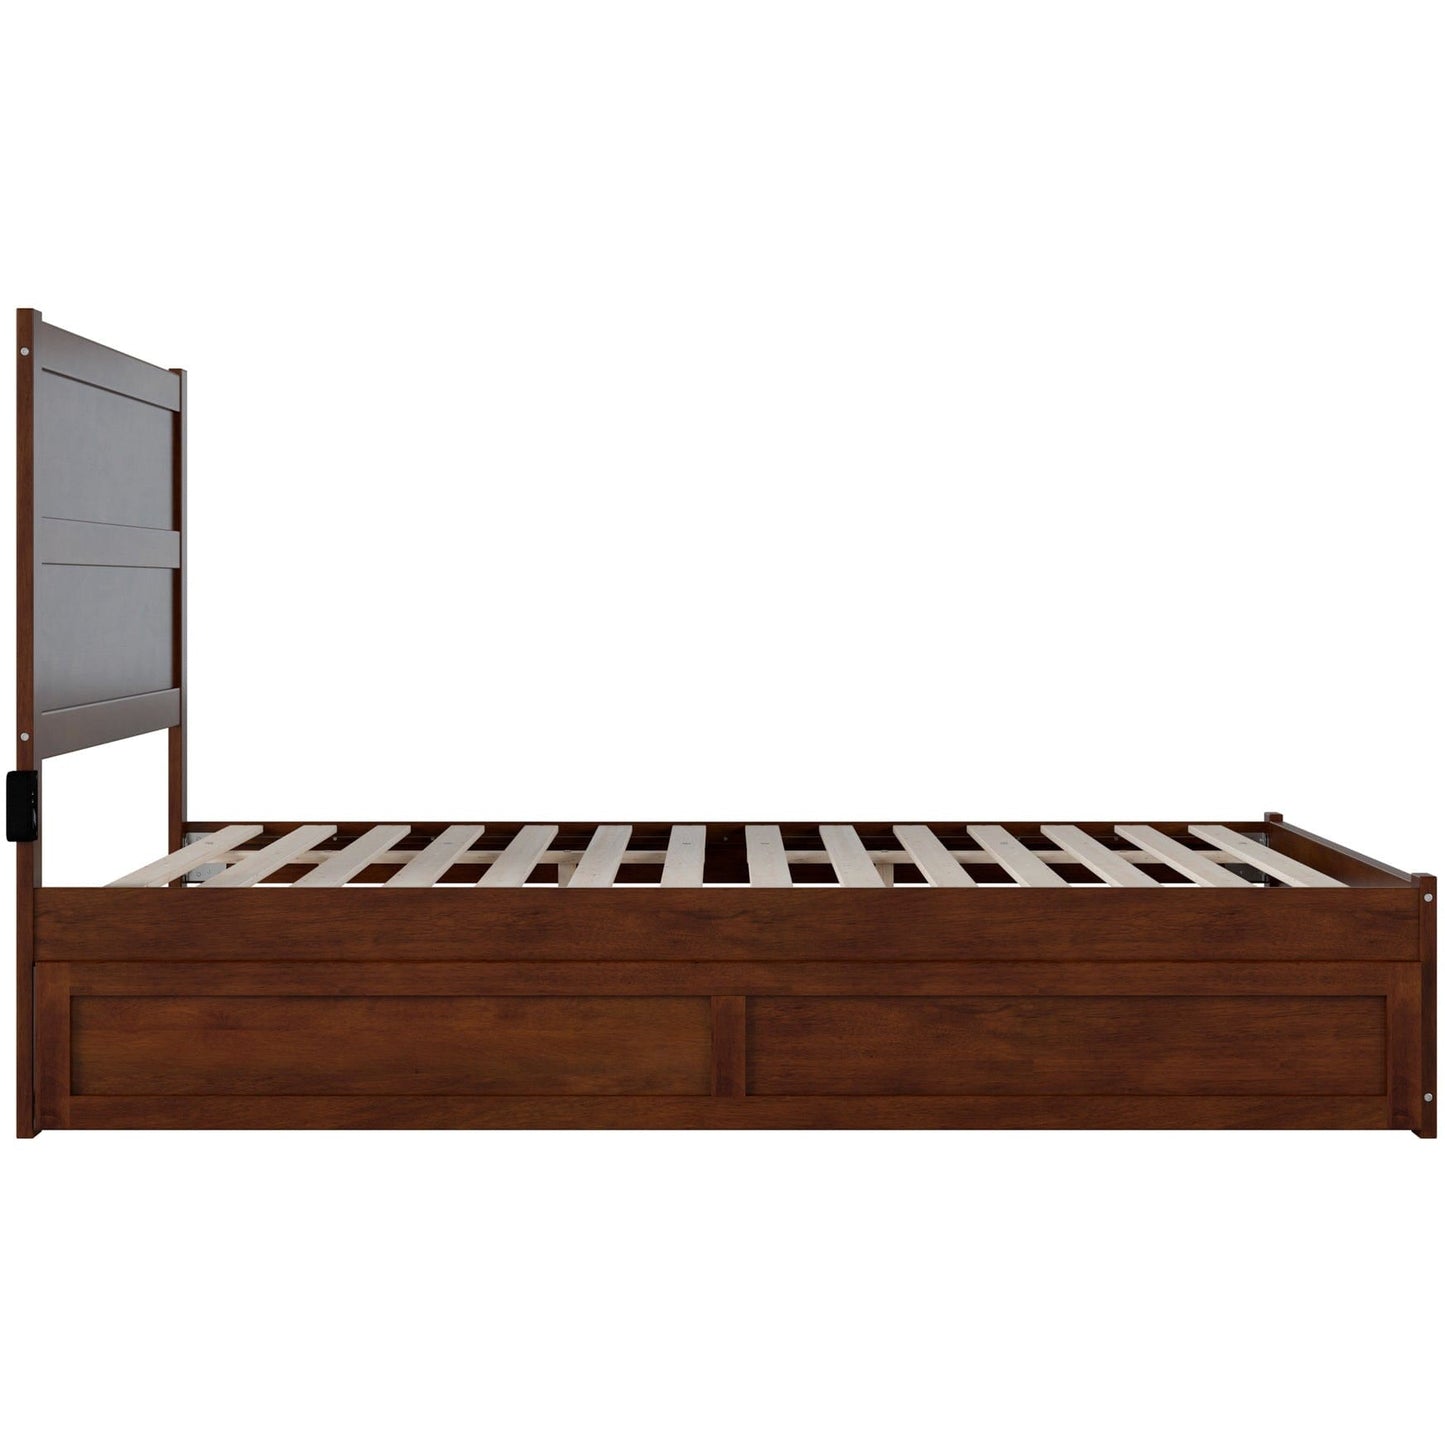 AFI Furnishings NoHo Queen Bed with Footboard and Twin Extra Long Trundle in Walnut AG9161144